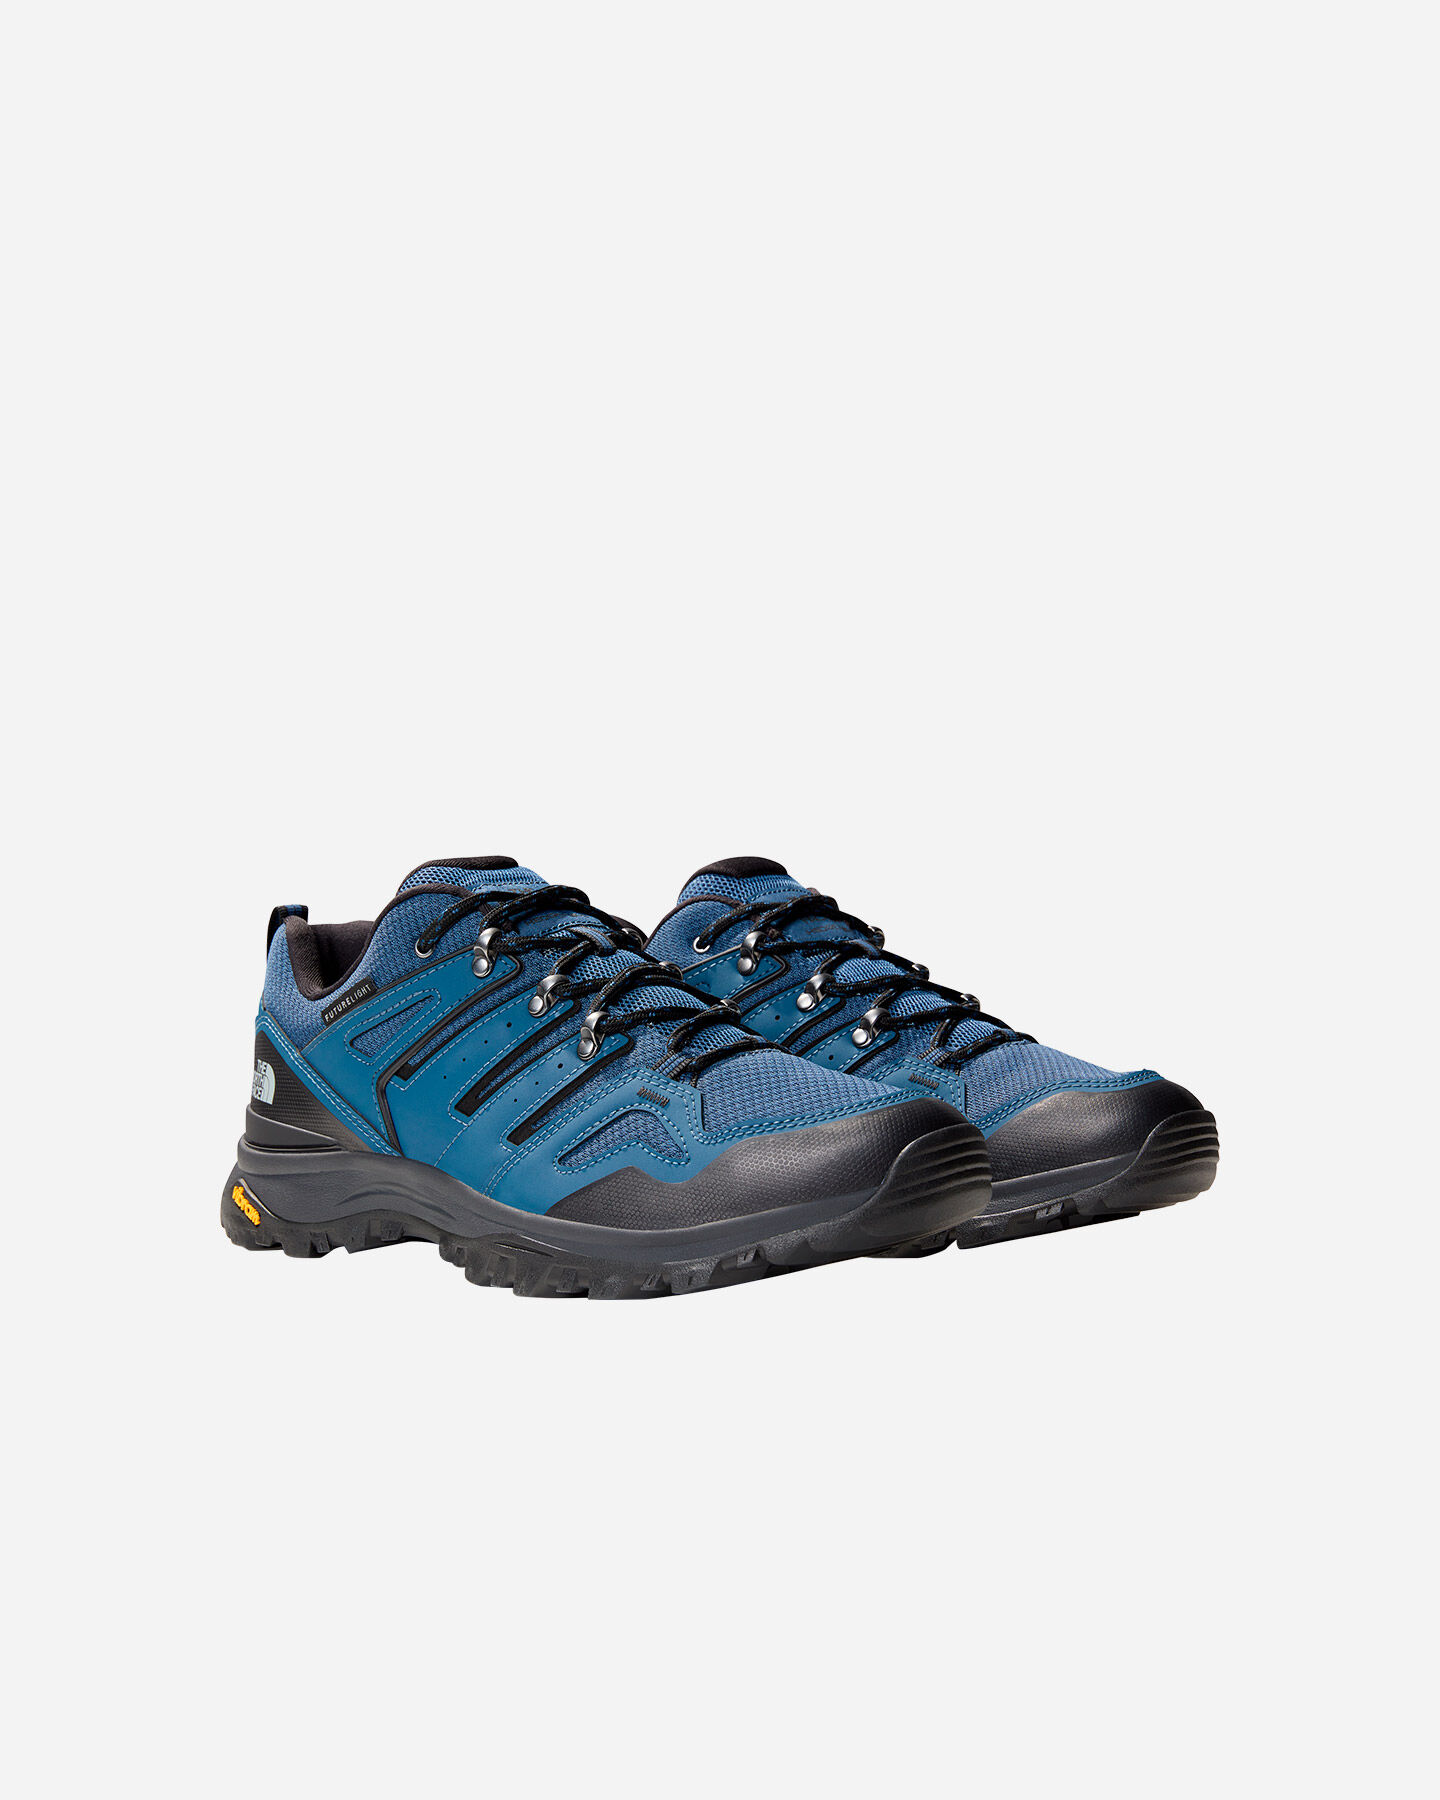  Scarpe trail THE NORTH FACE HEDGEHOG M S5612384|MG7|11.5 scatto 1